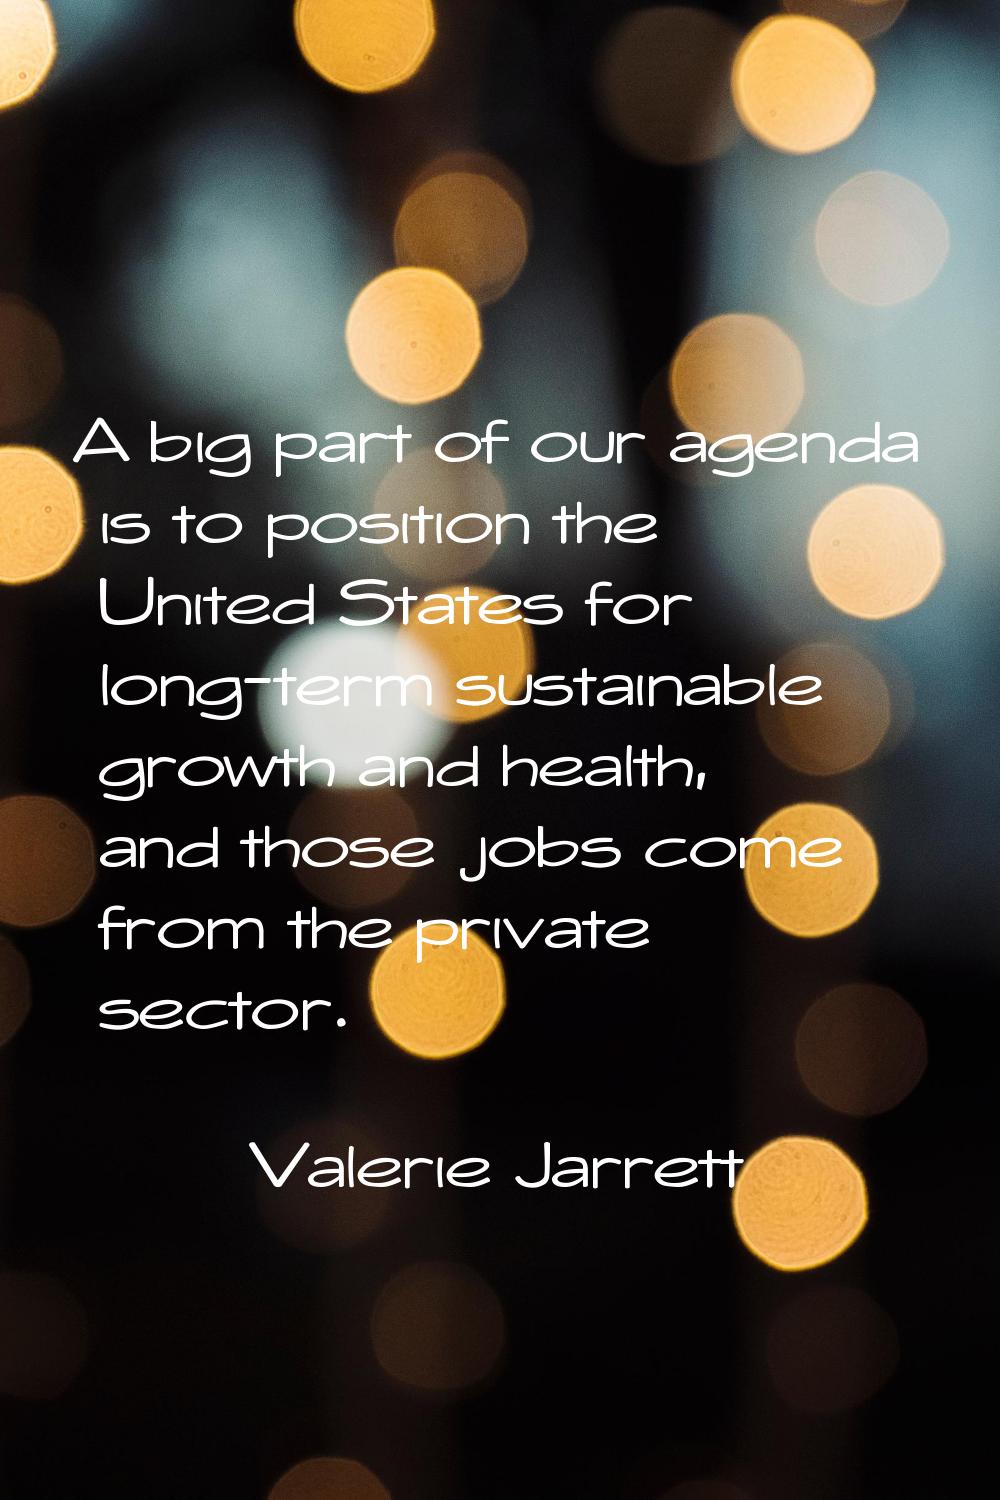 A big part of our agenda is to position the United States for long-term sustainable growth and heal